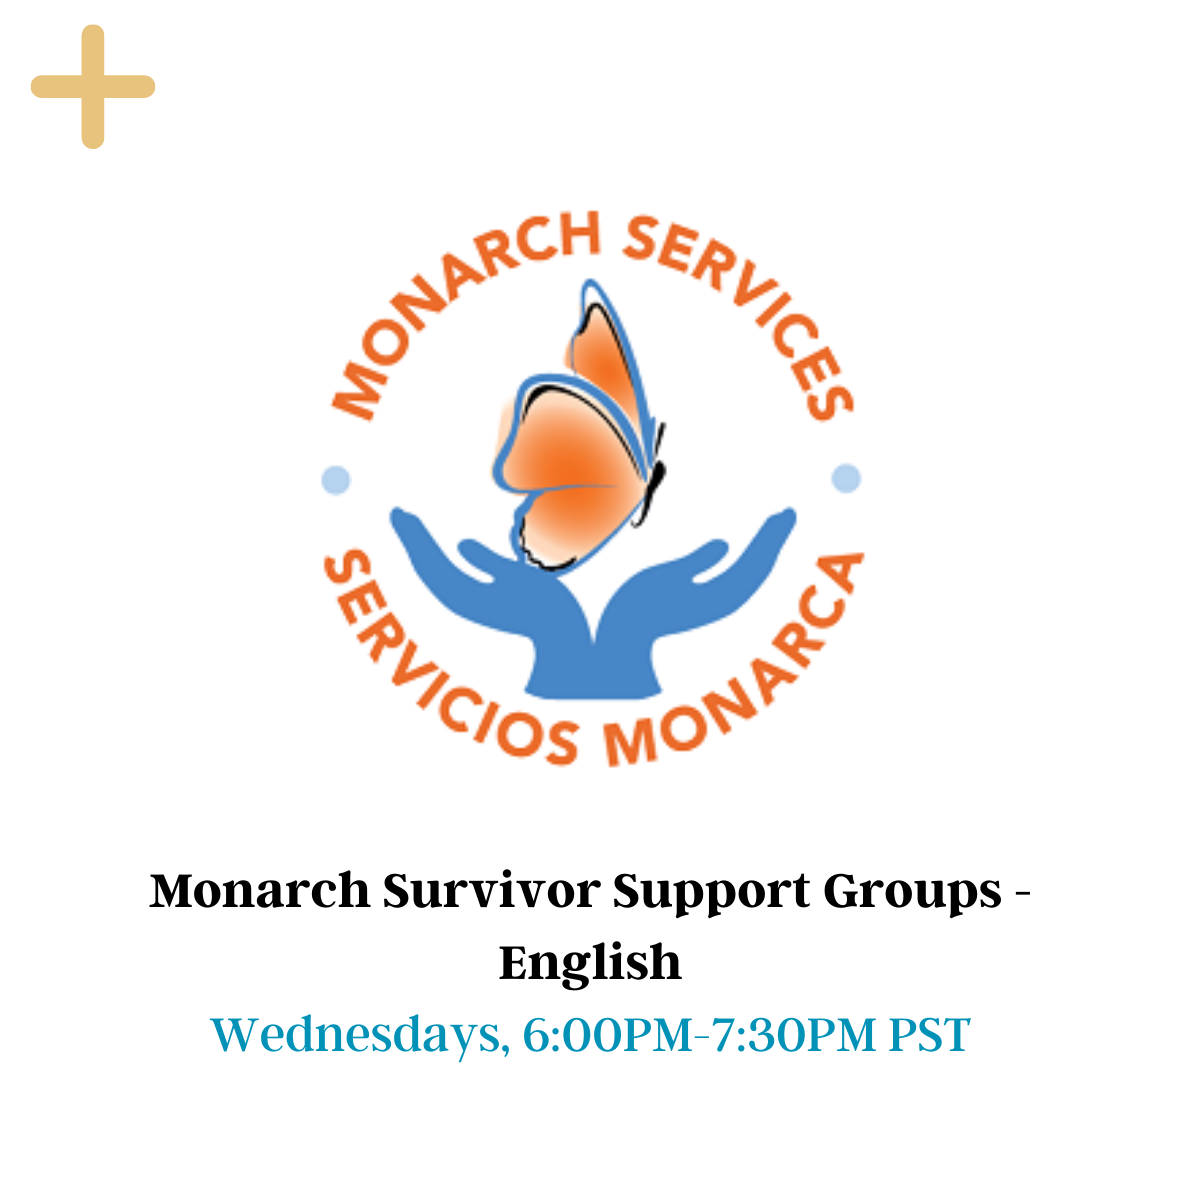 Monarch Survivor Support Groups - English cover page with the Monarch Services logo (an orange butterfly in between blue hands). The yellow button on the top can be clicked and will provide more information. The picture has date at the bottom: Wednesdays, 6:00 PM – 7:30 PM